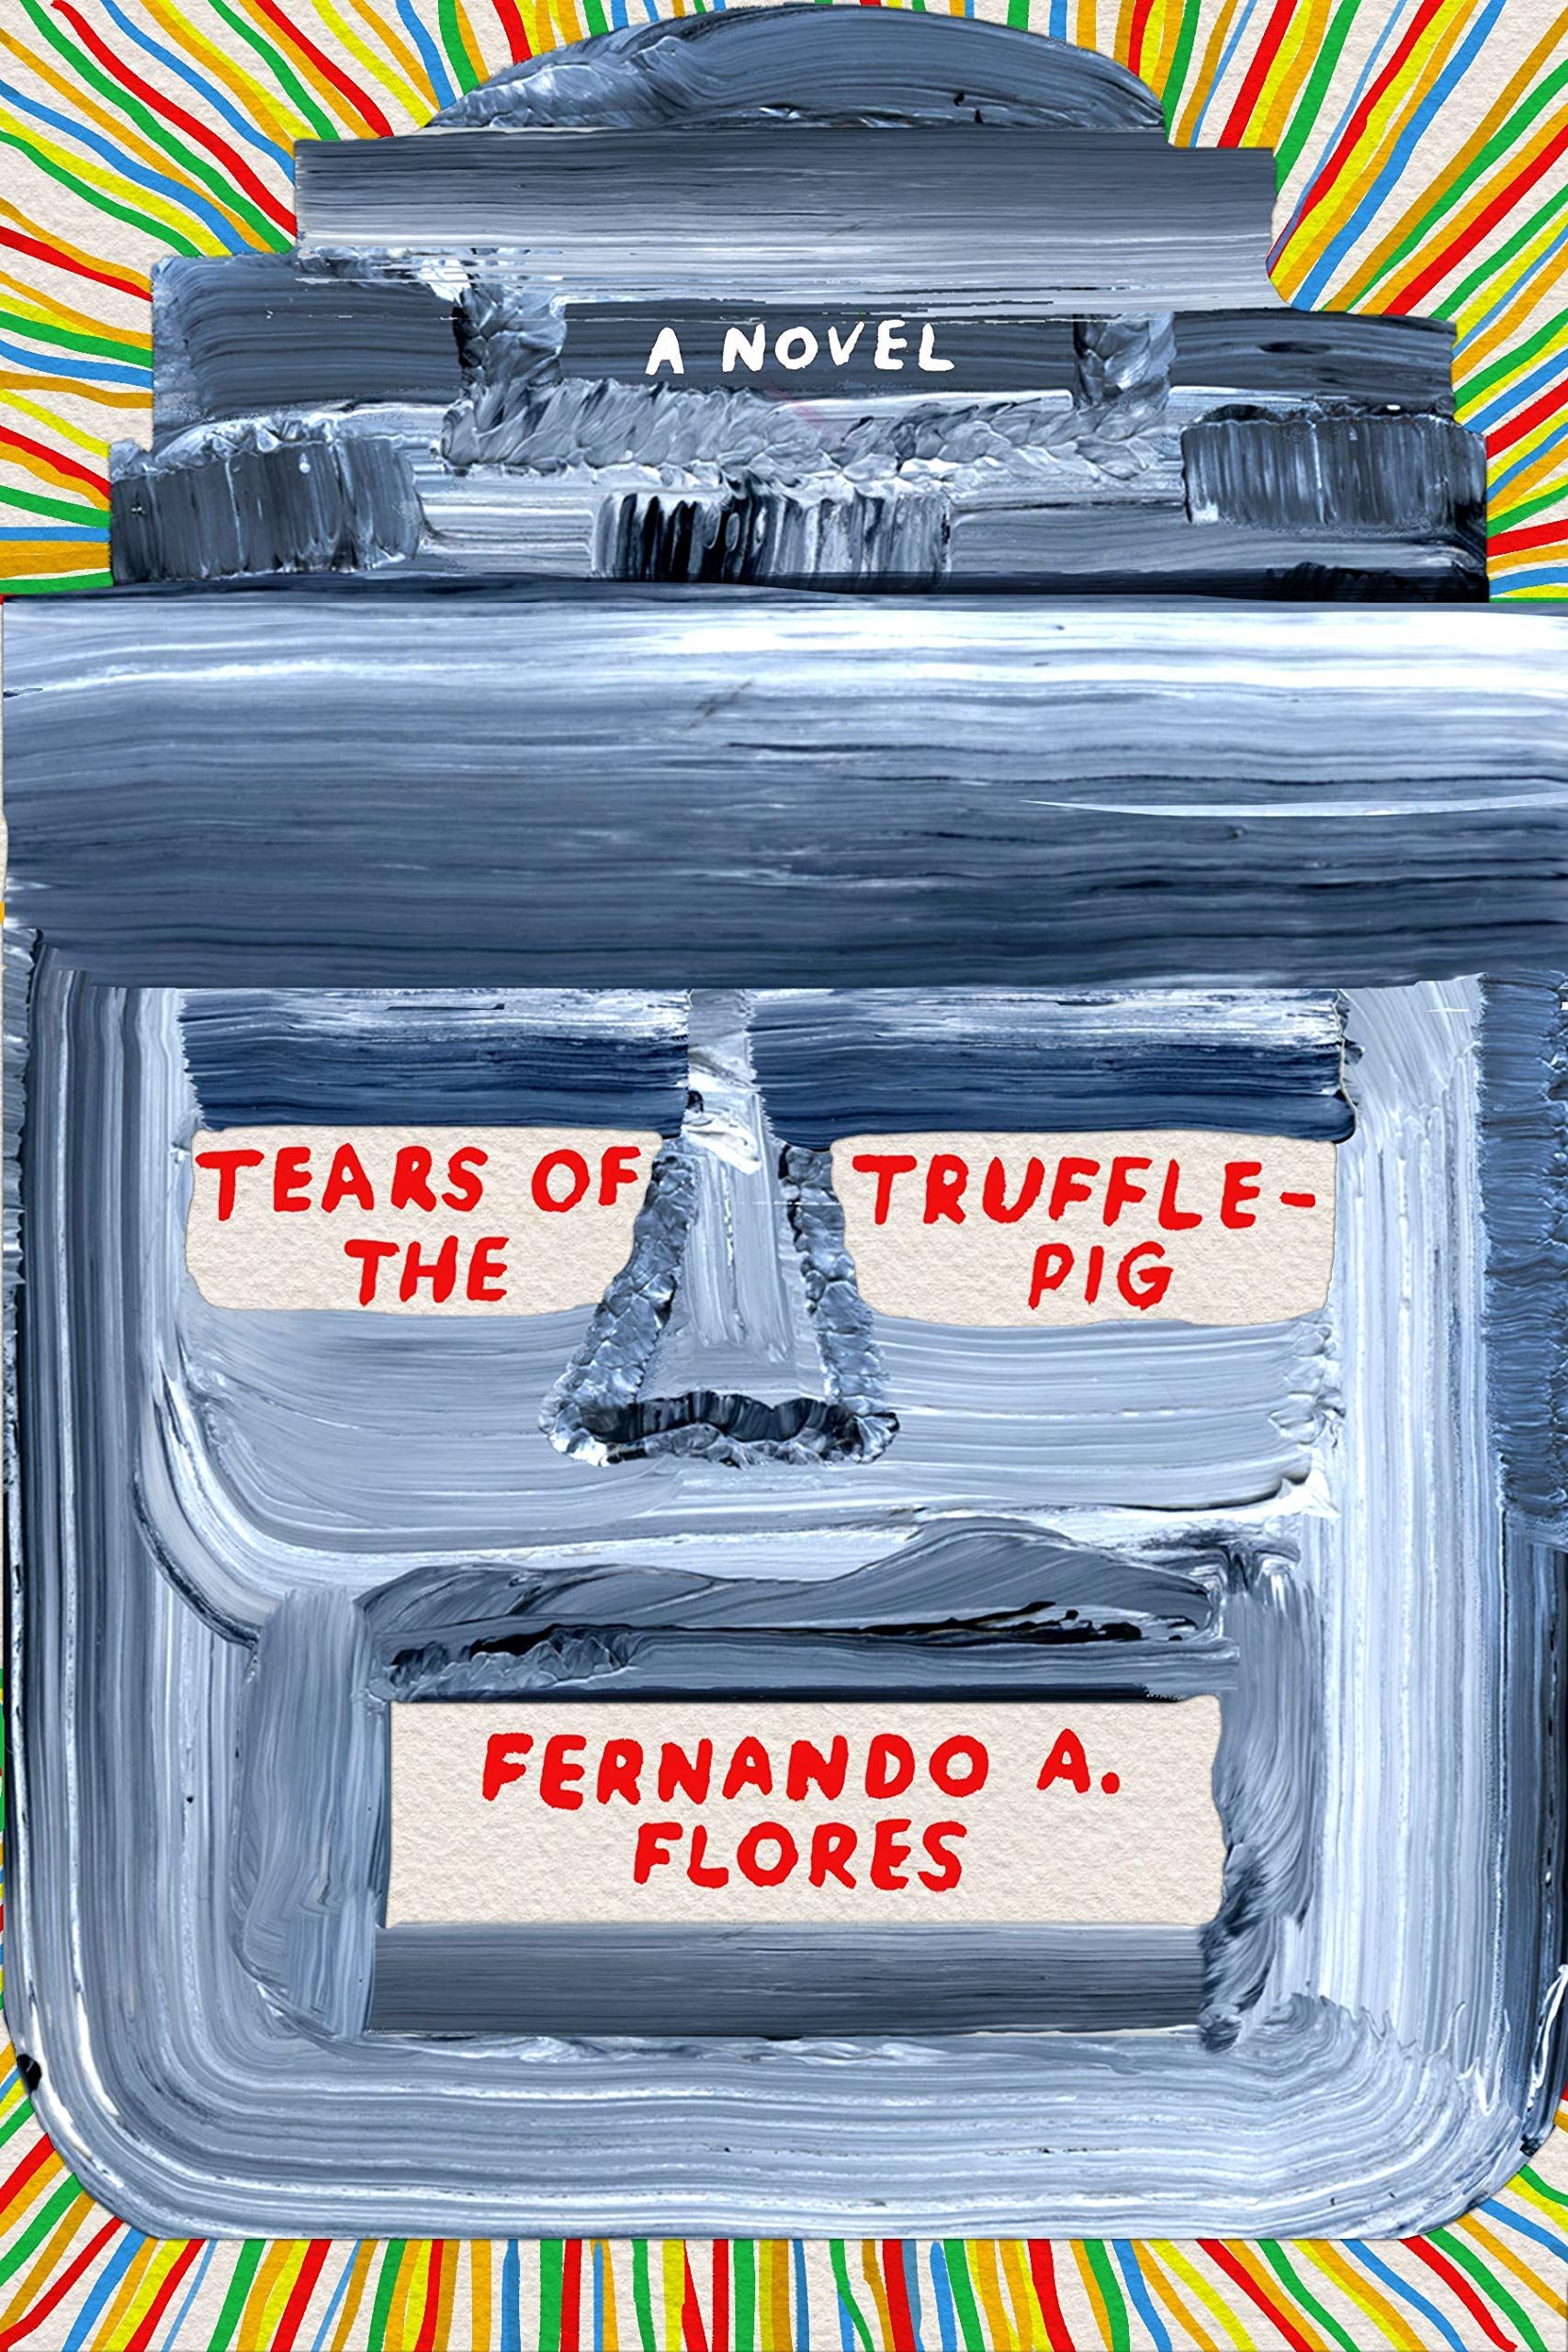 Sacred Horror and the Border Imagination: On Fernando A. Flores’s “Tears of the Trufflepig”